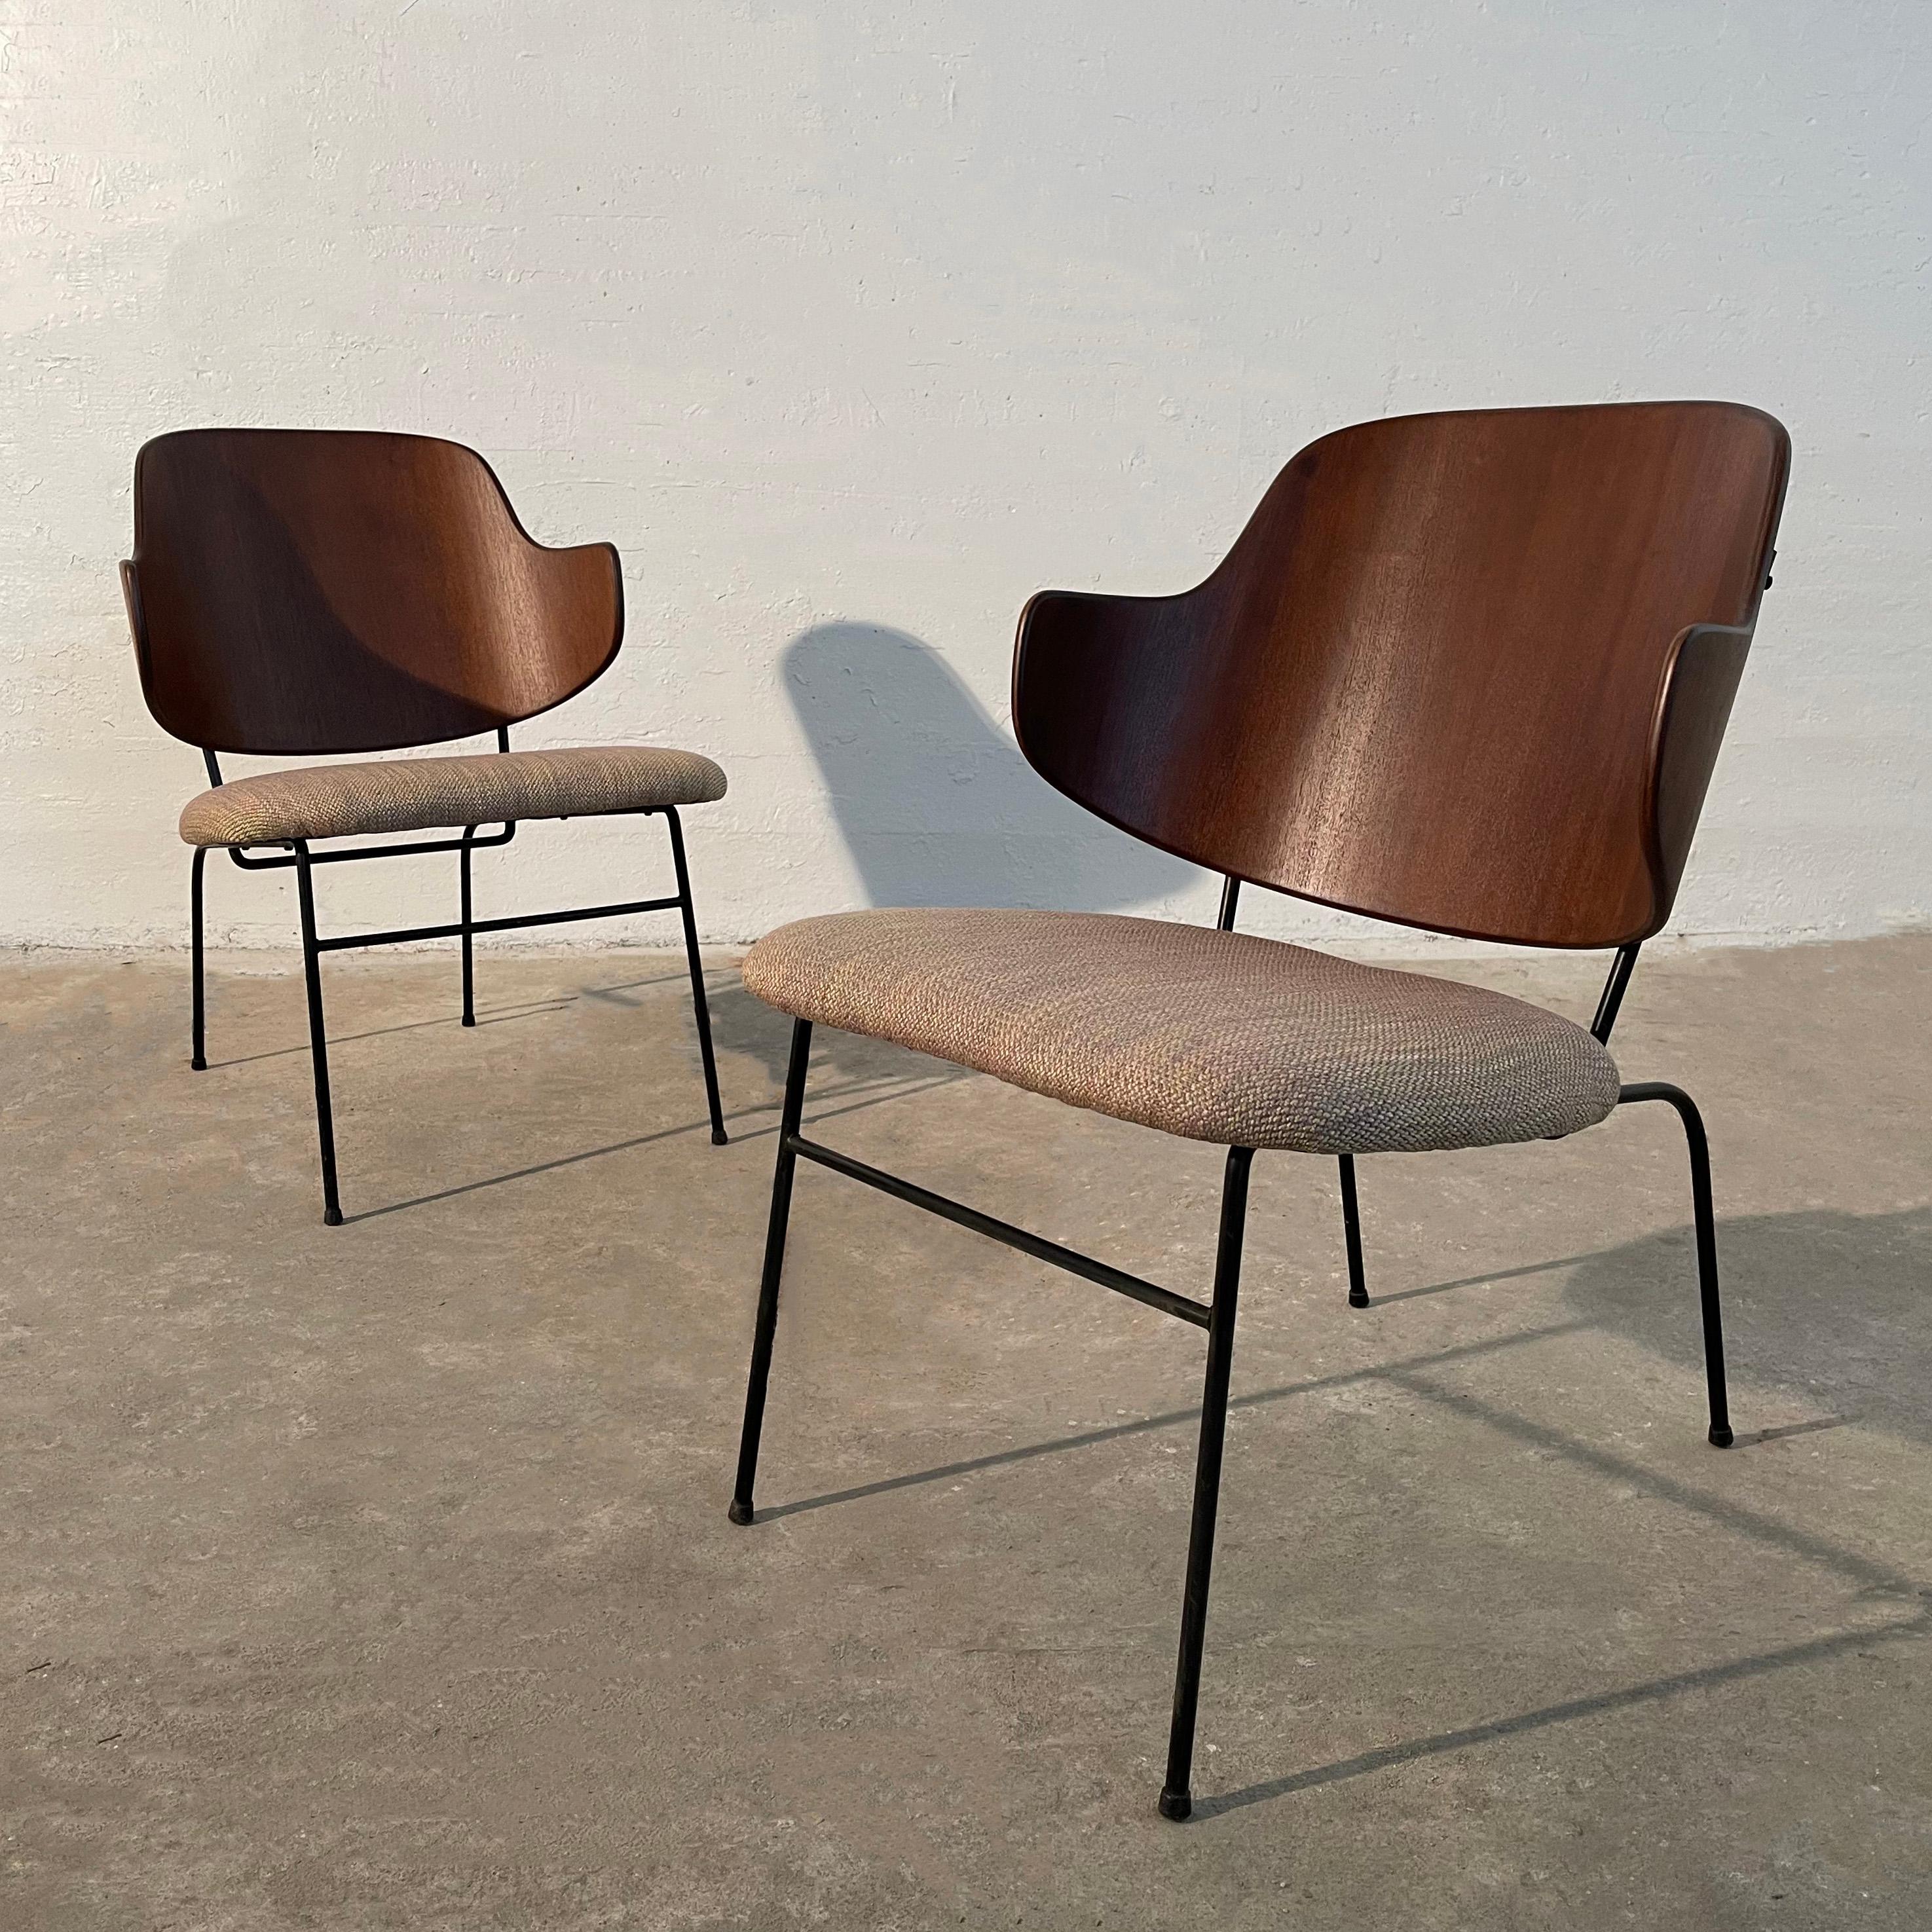 Pair Of Rare Model Penguin Chairs By Ib Kofod-Larsen For Selig For Sale 1